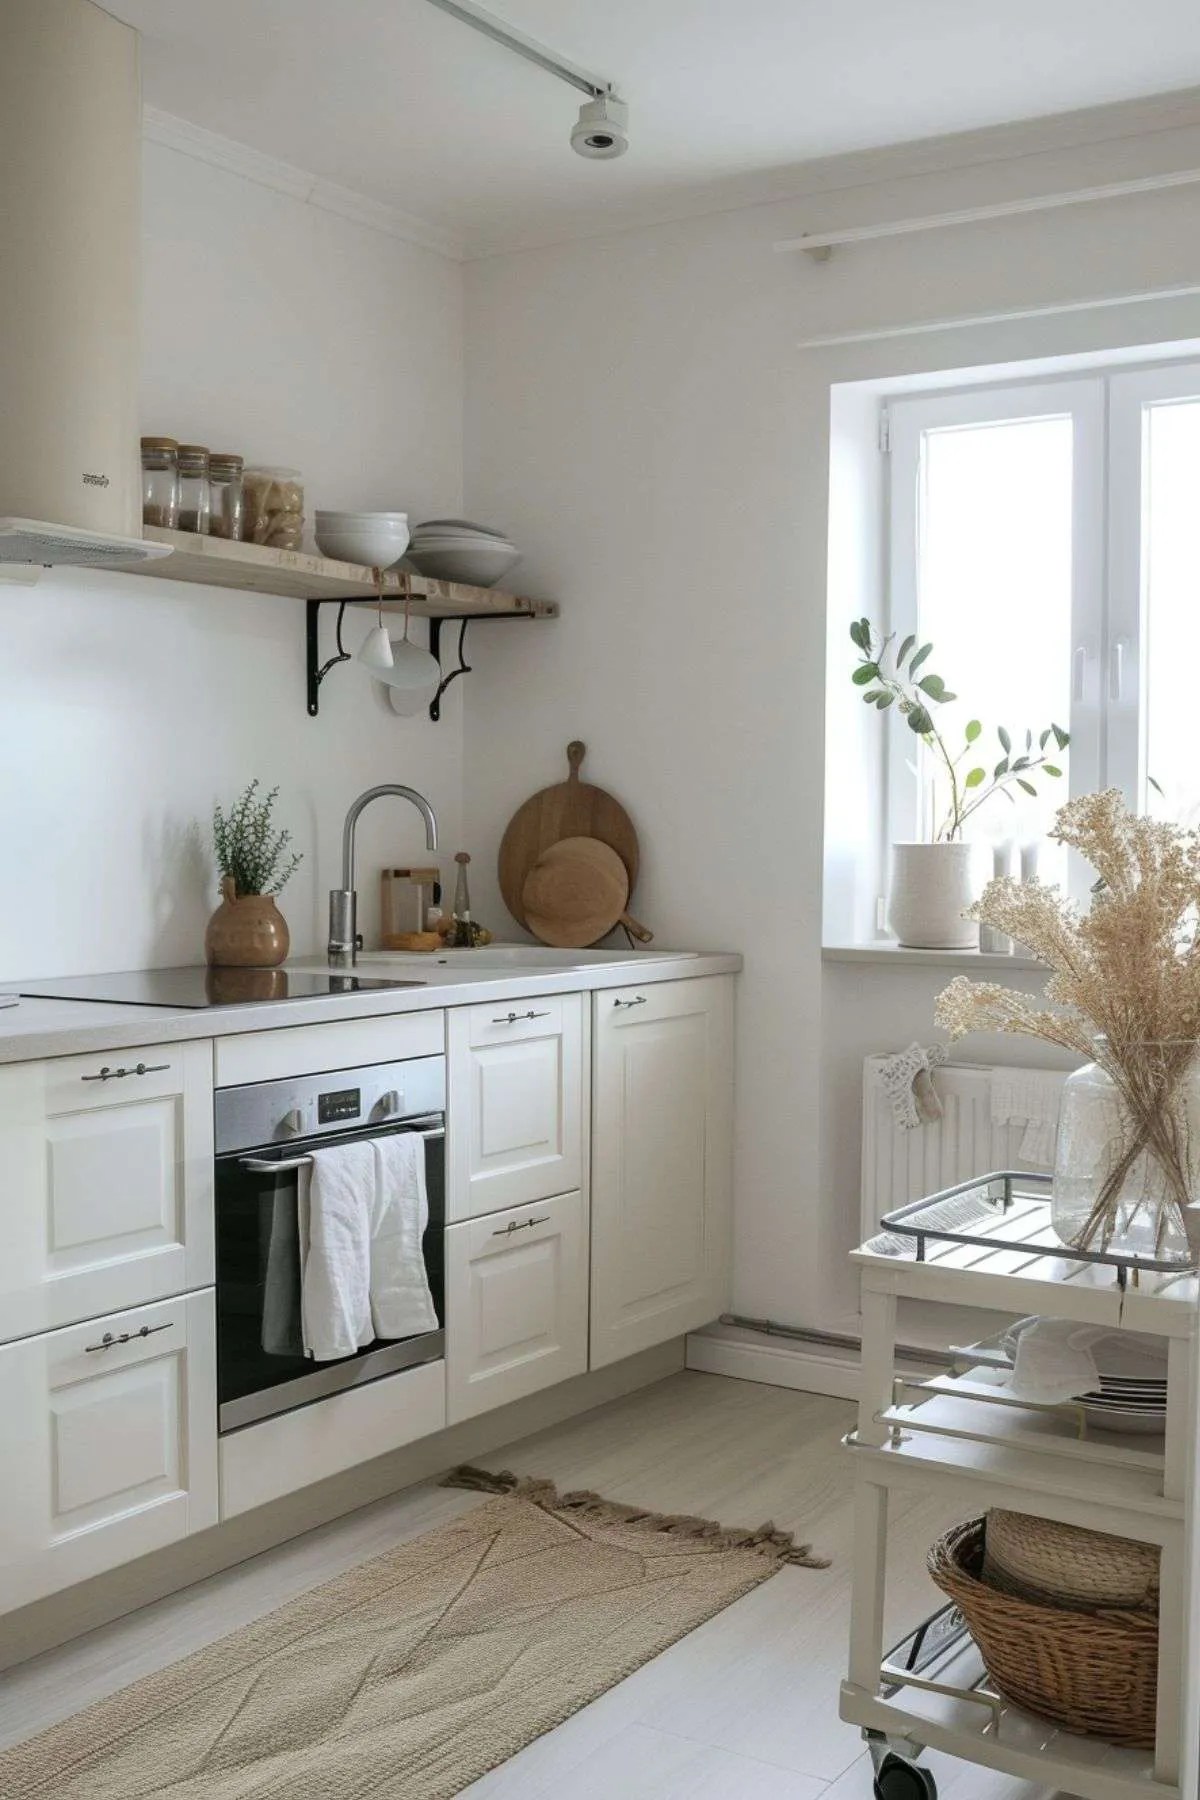 How to Organize a Small Kitchen – 17 Ideas for a Tidy and Spacious Feel